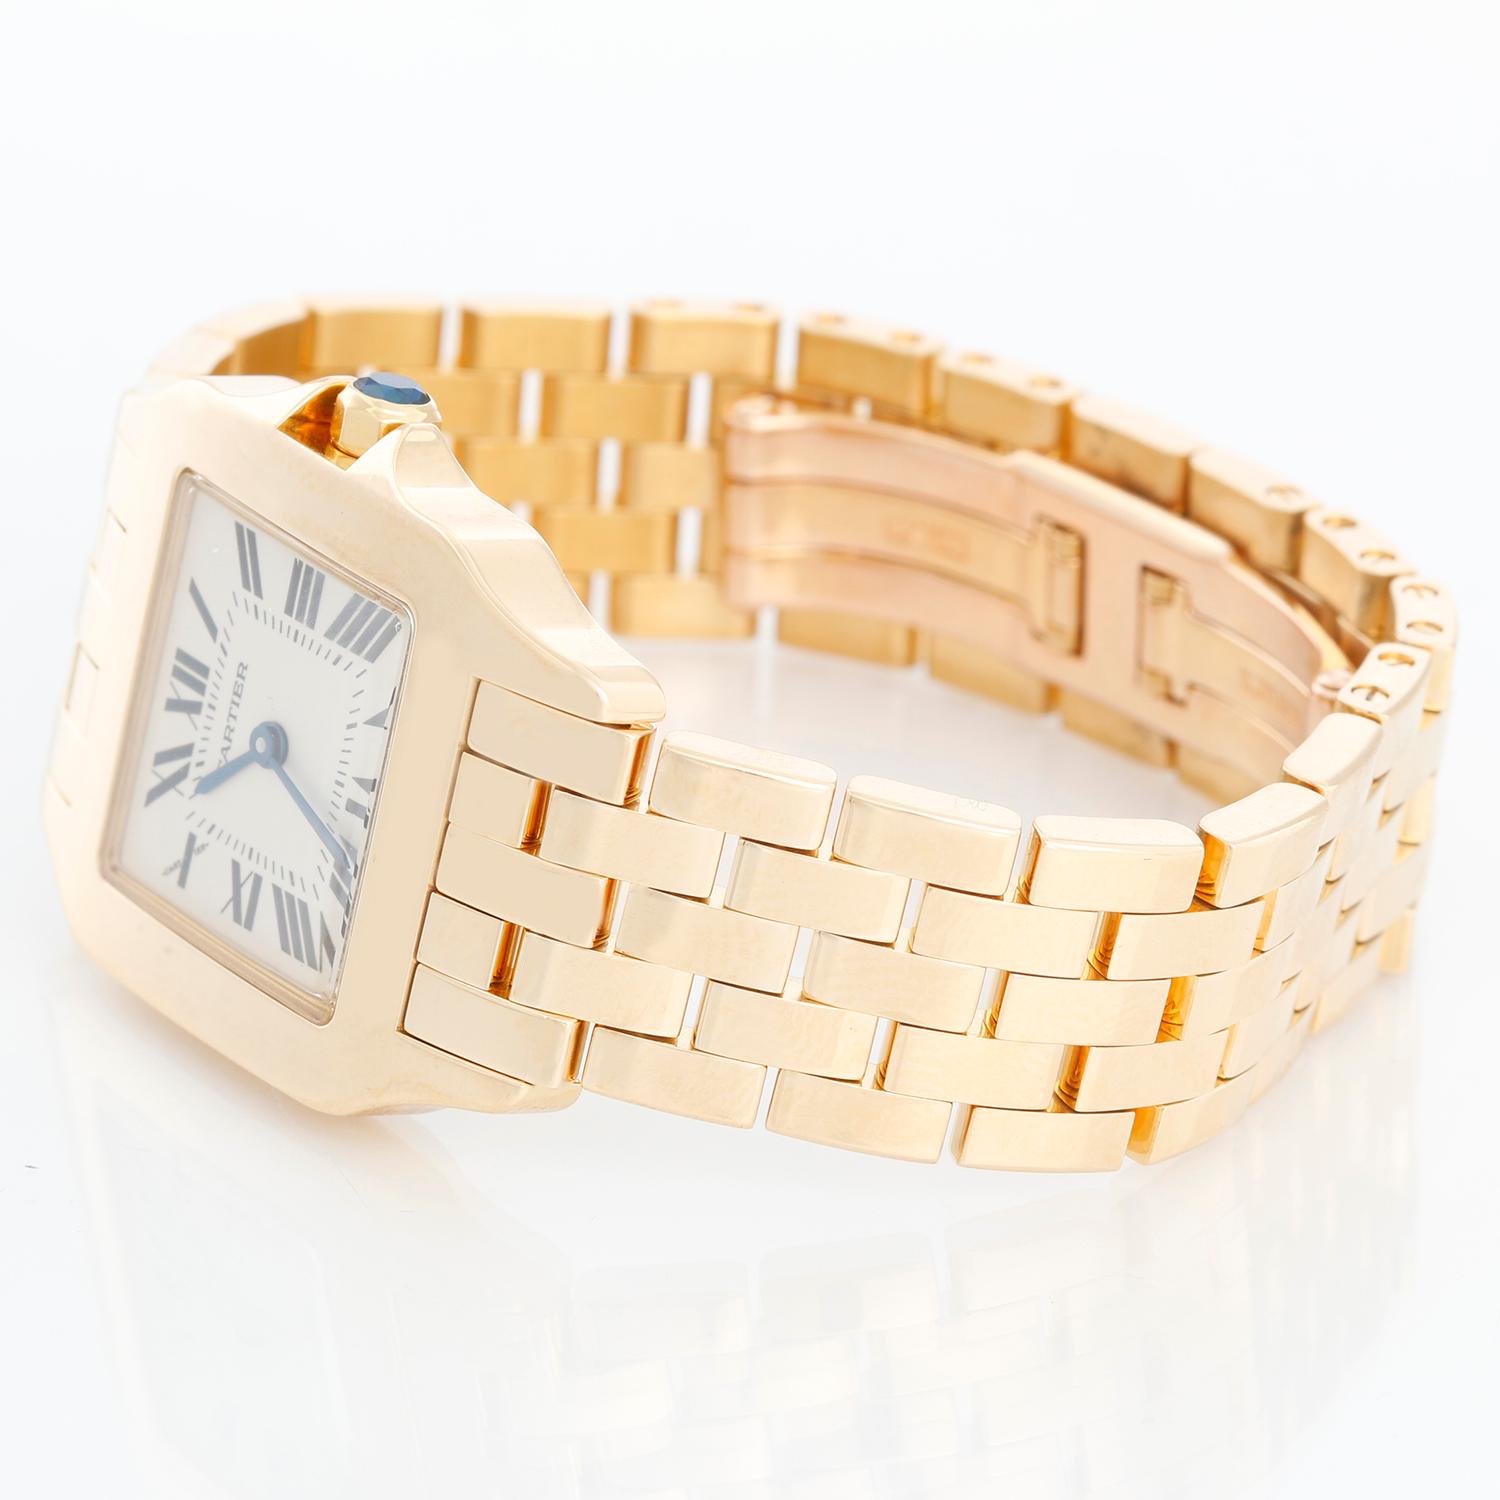 Cartier Santos Demoiselle 18k Yellow Gold Midsize Watch 2702 - Quartz. 18k yellow gold case (26mm x 38mm). Ivory colored dial with black Roman numerals. 18k yellow gold Cartier bracelet with deployant clasp. Pre-owned with Cartier box.